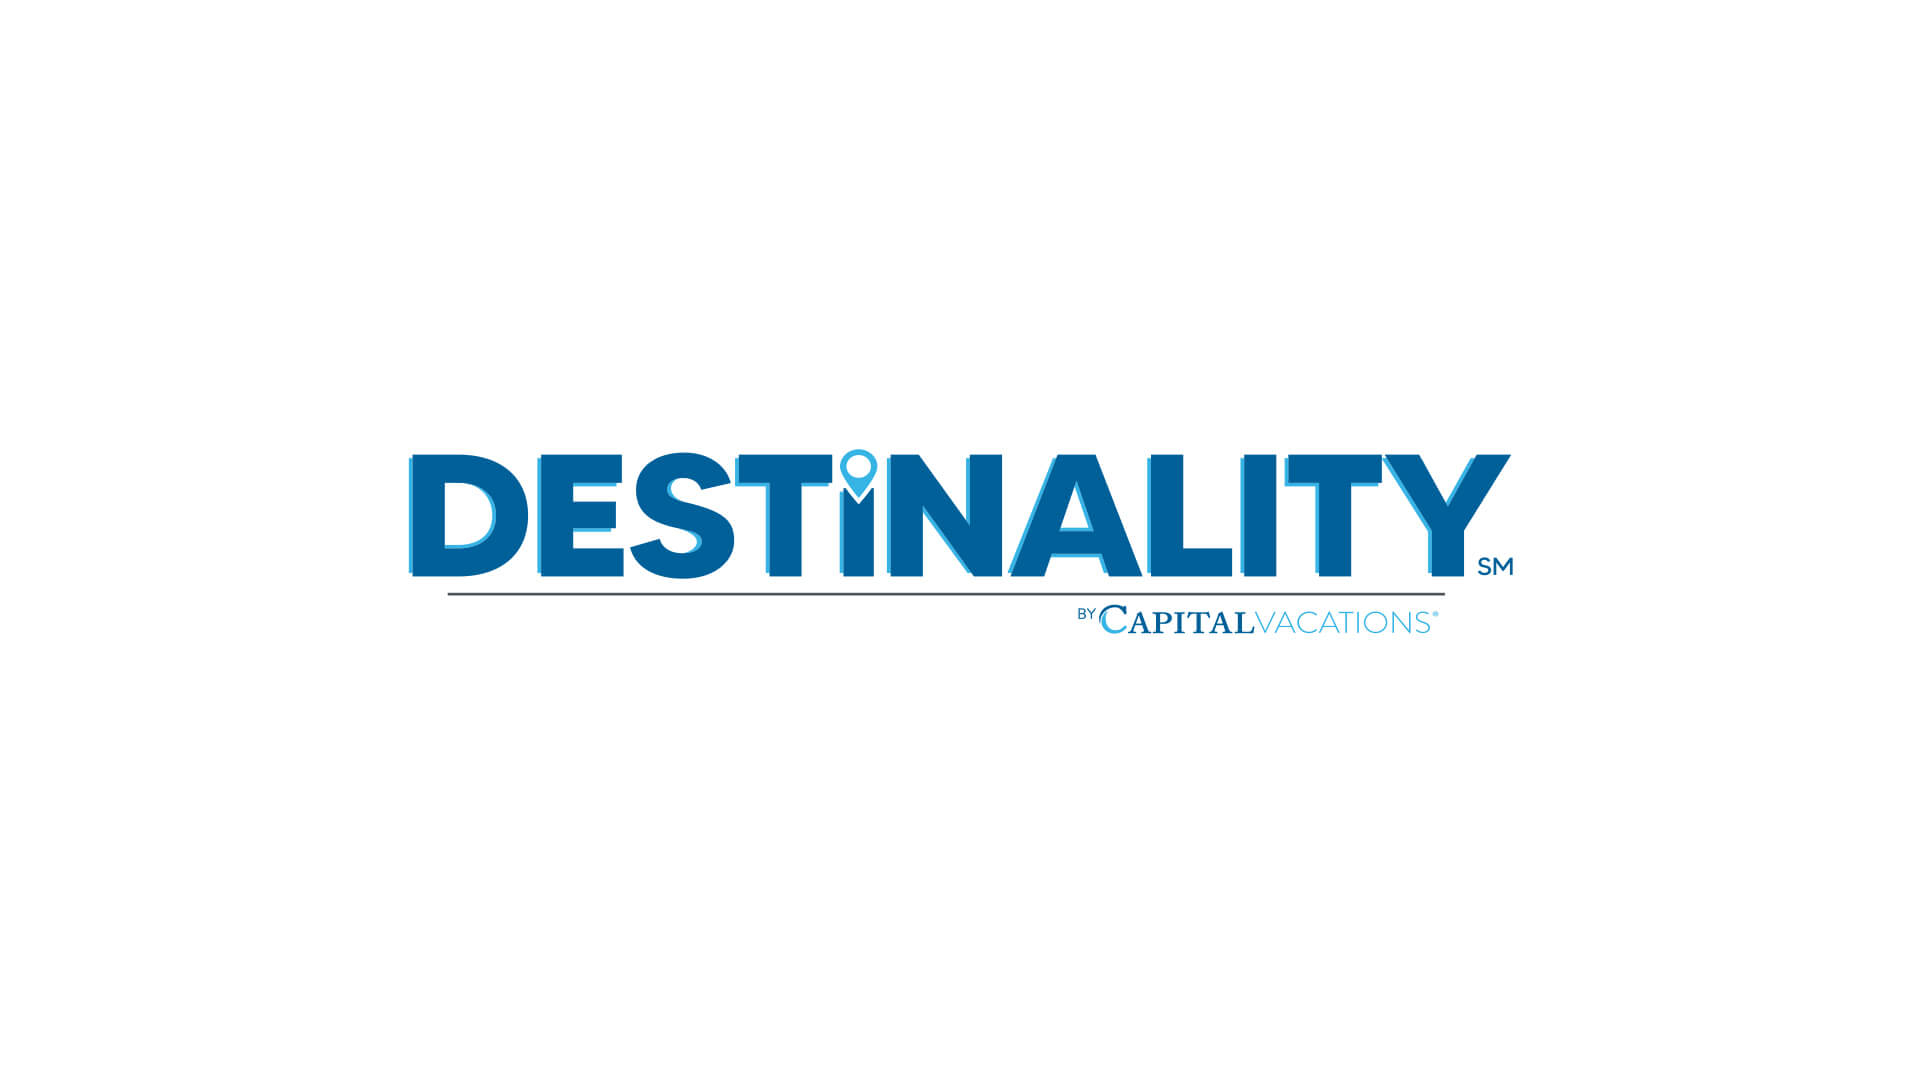 Capital Vacations® launches Destinality℠, a new member-based travel platform